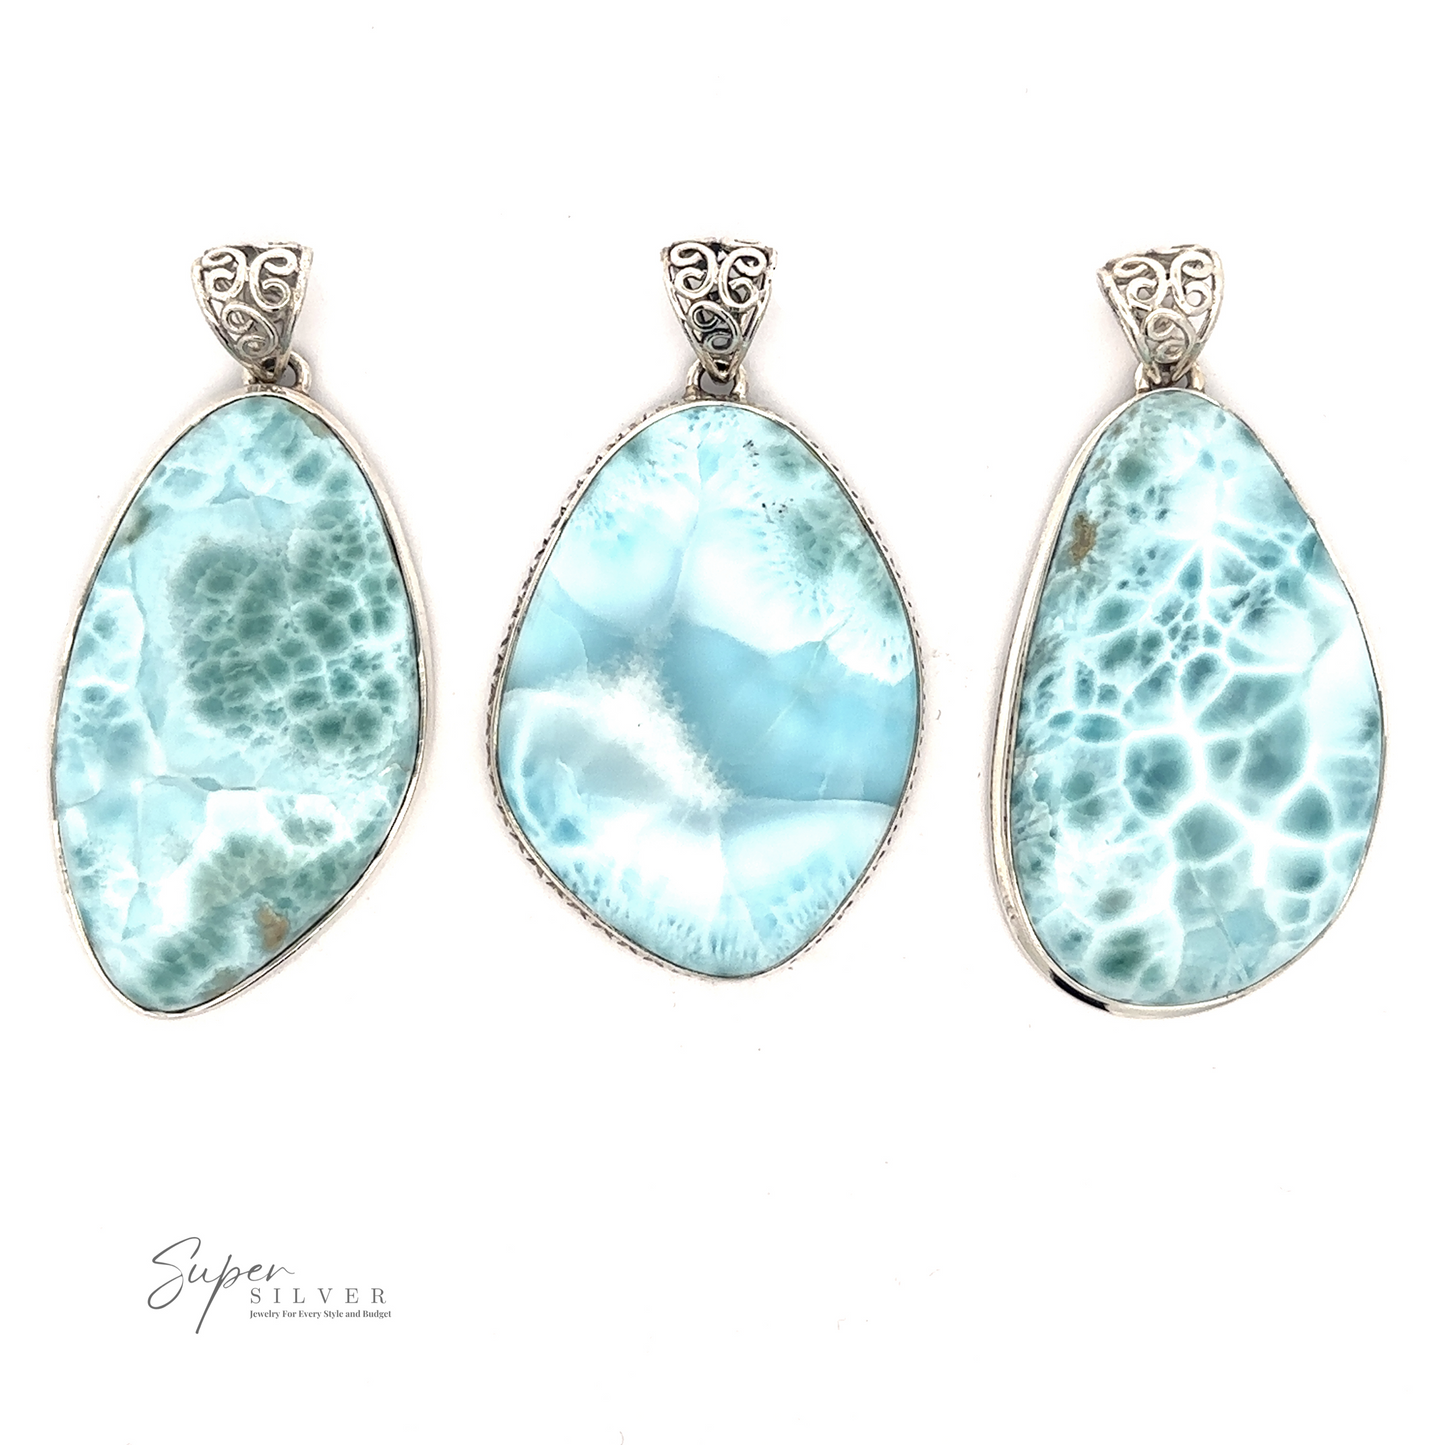 
                  
                    Three Freeform Large Larimar Pendants, each with unique blue and white patterns, set in Sterling Silver bezels with decorative bails, displayed on a plain white background.
                  
                